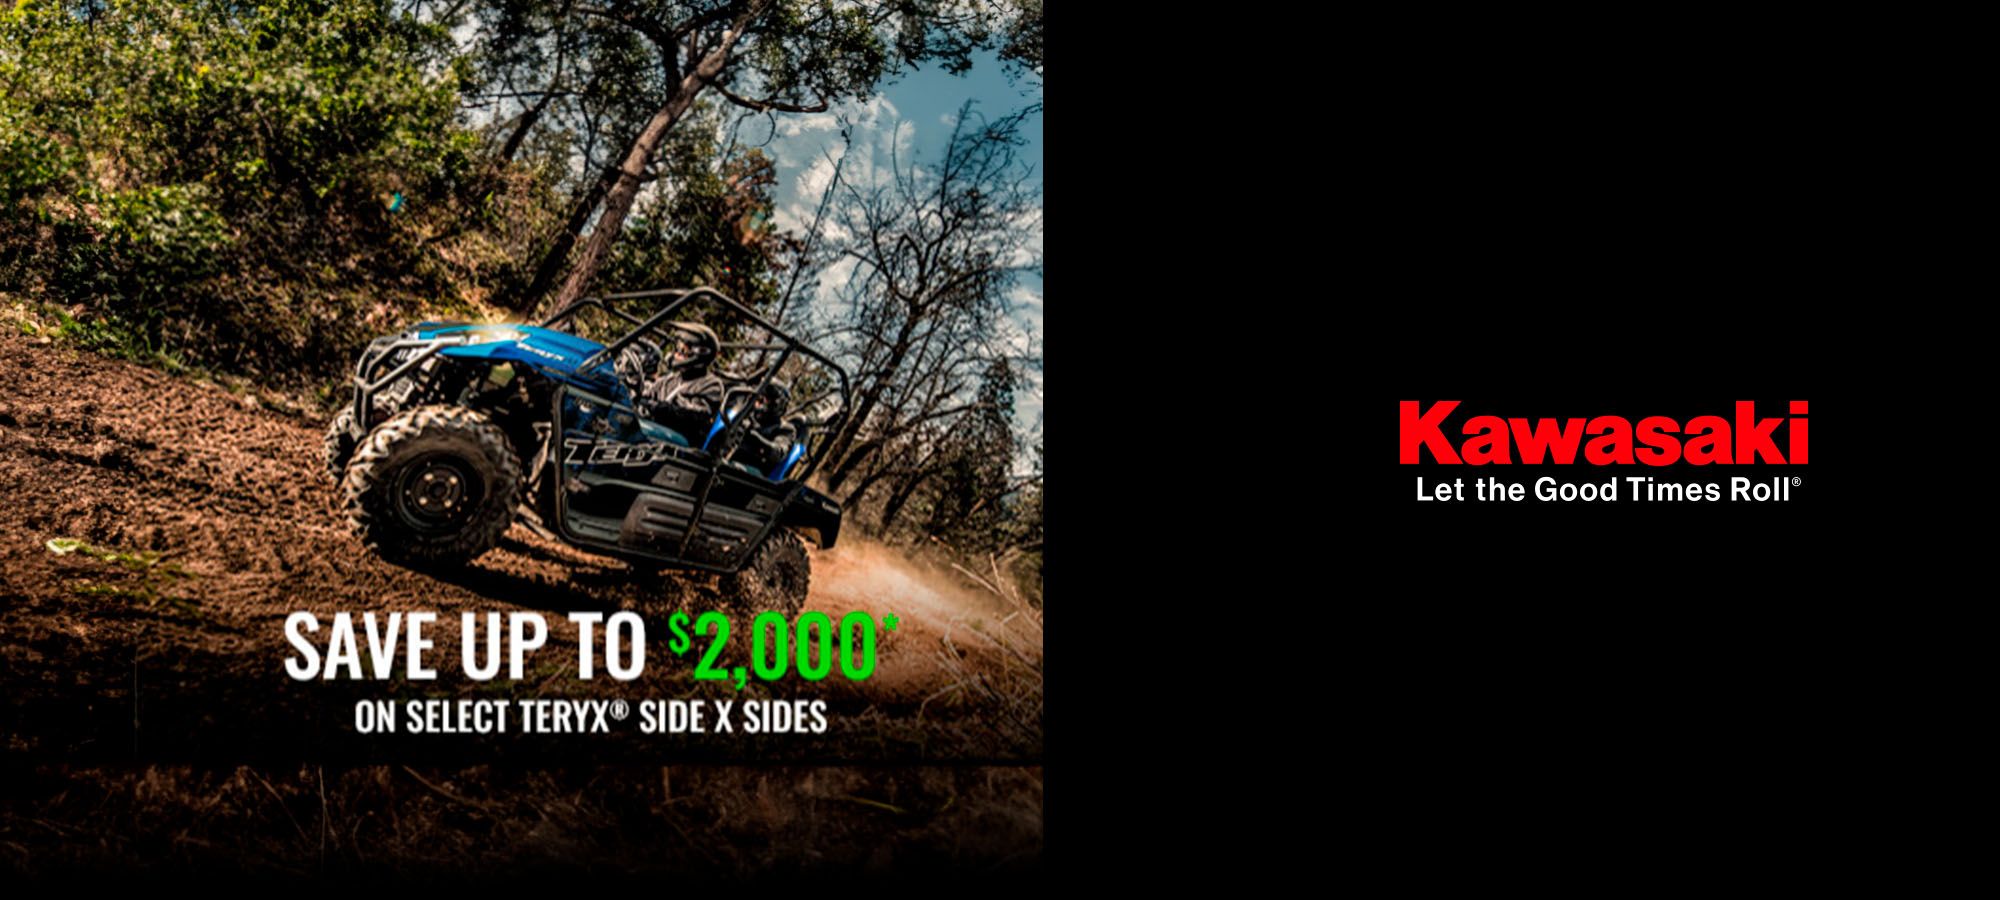 Kawasaki US - Save Up to $2,000* On Select Side X Sides at Powersports St. Augustine